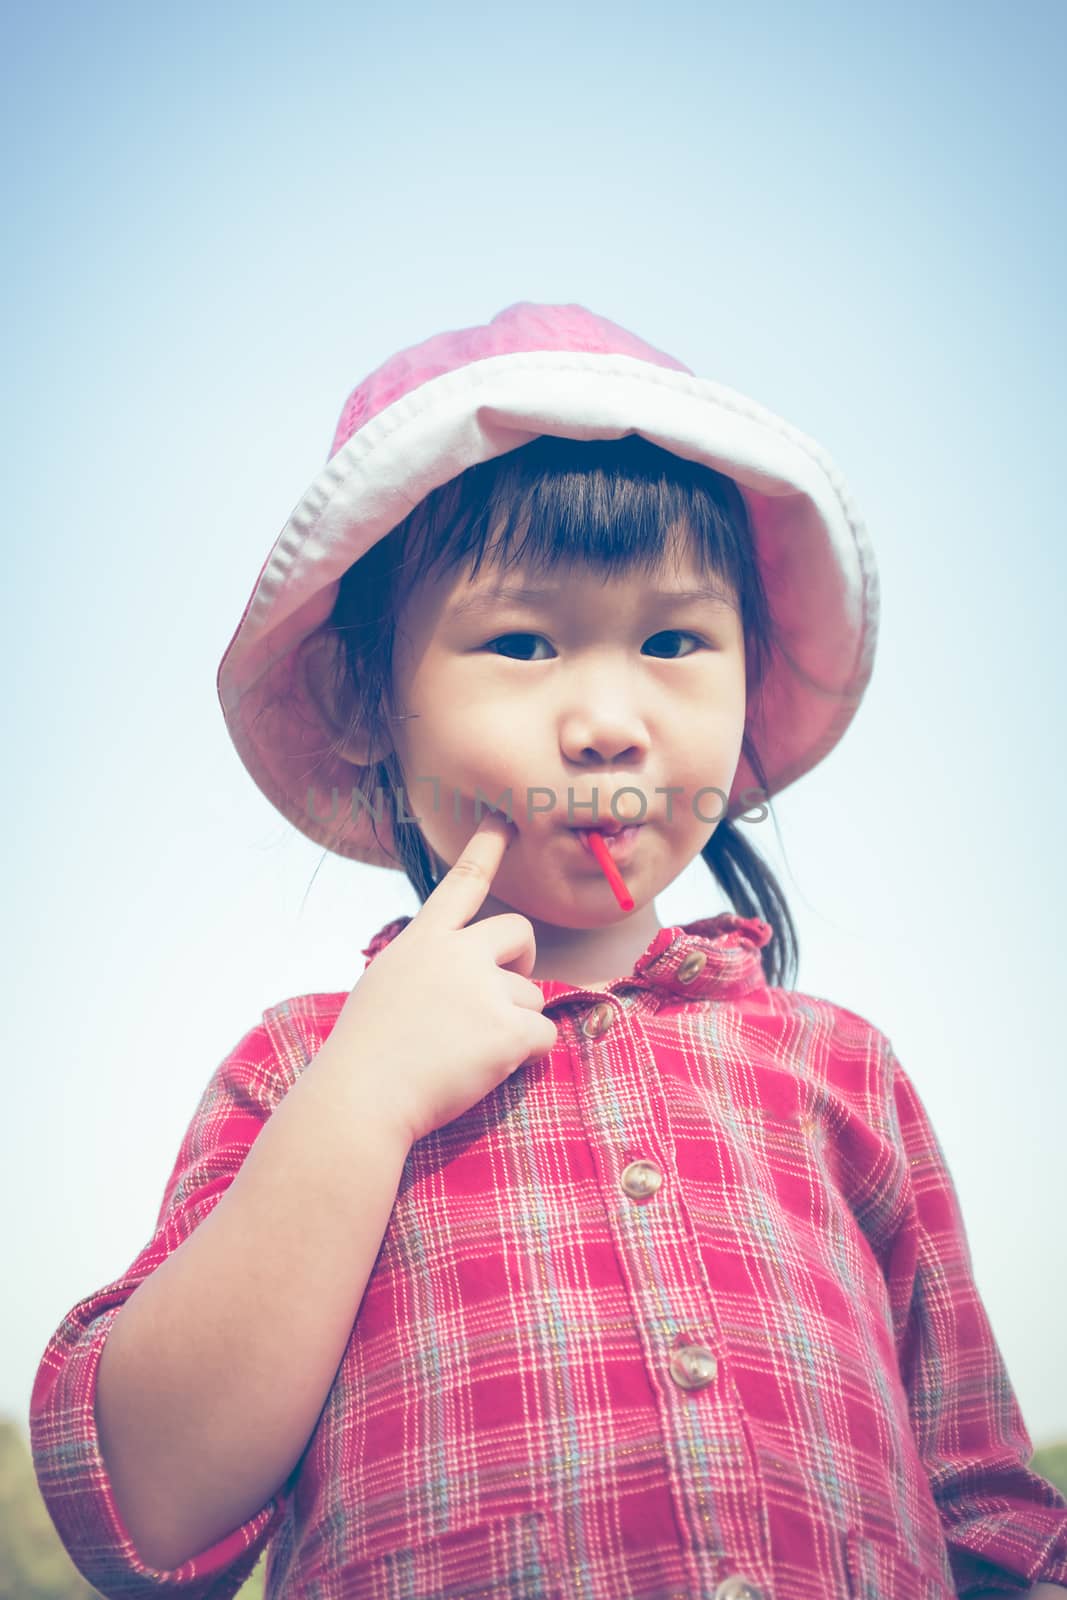 Cute little asian girl eating a lollipop on nature background in summertime. Child wearing pink hat and looking at camera. Cross process. Vintage style.